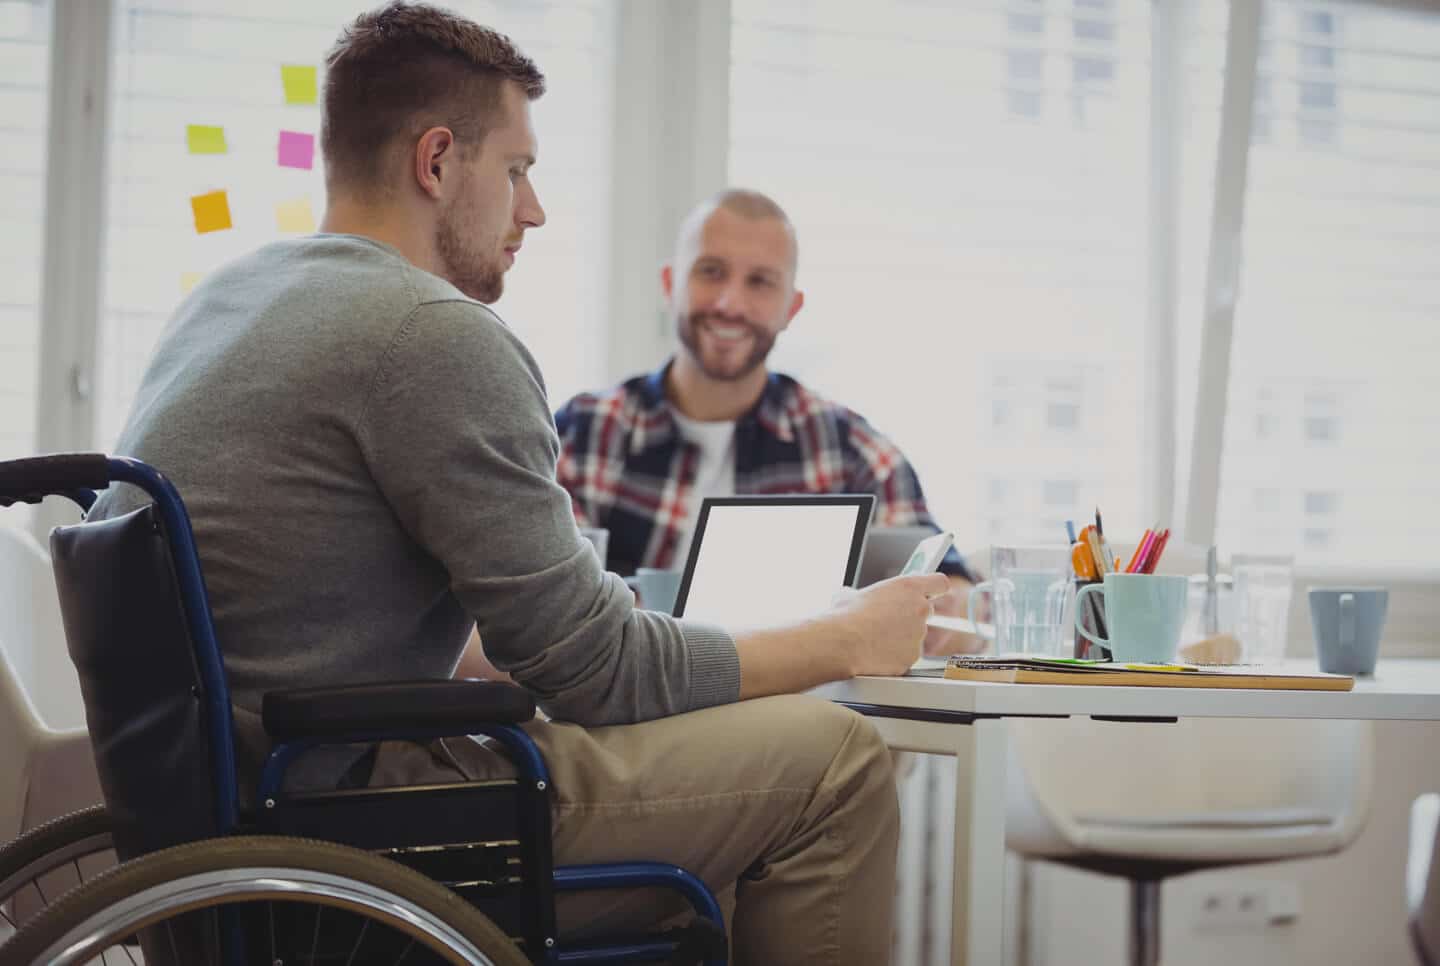 Man in wheelchair working on laptop in office with a coworker smiling